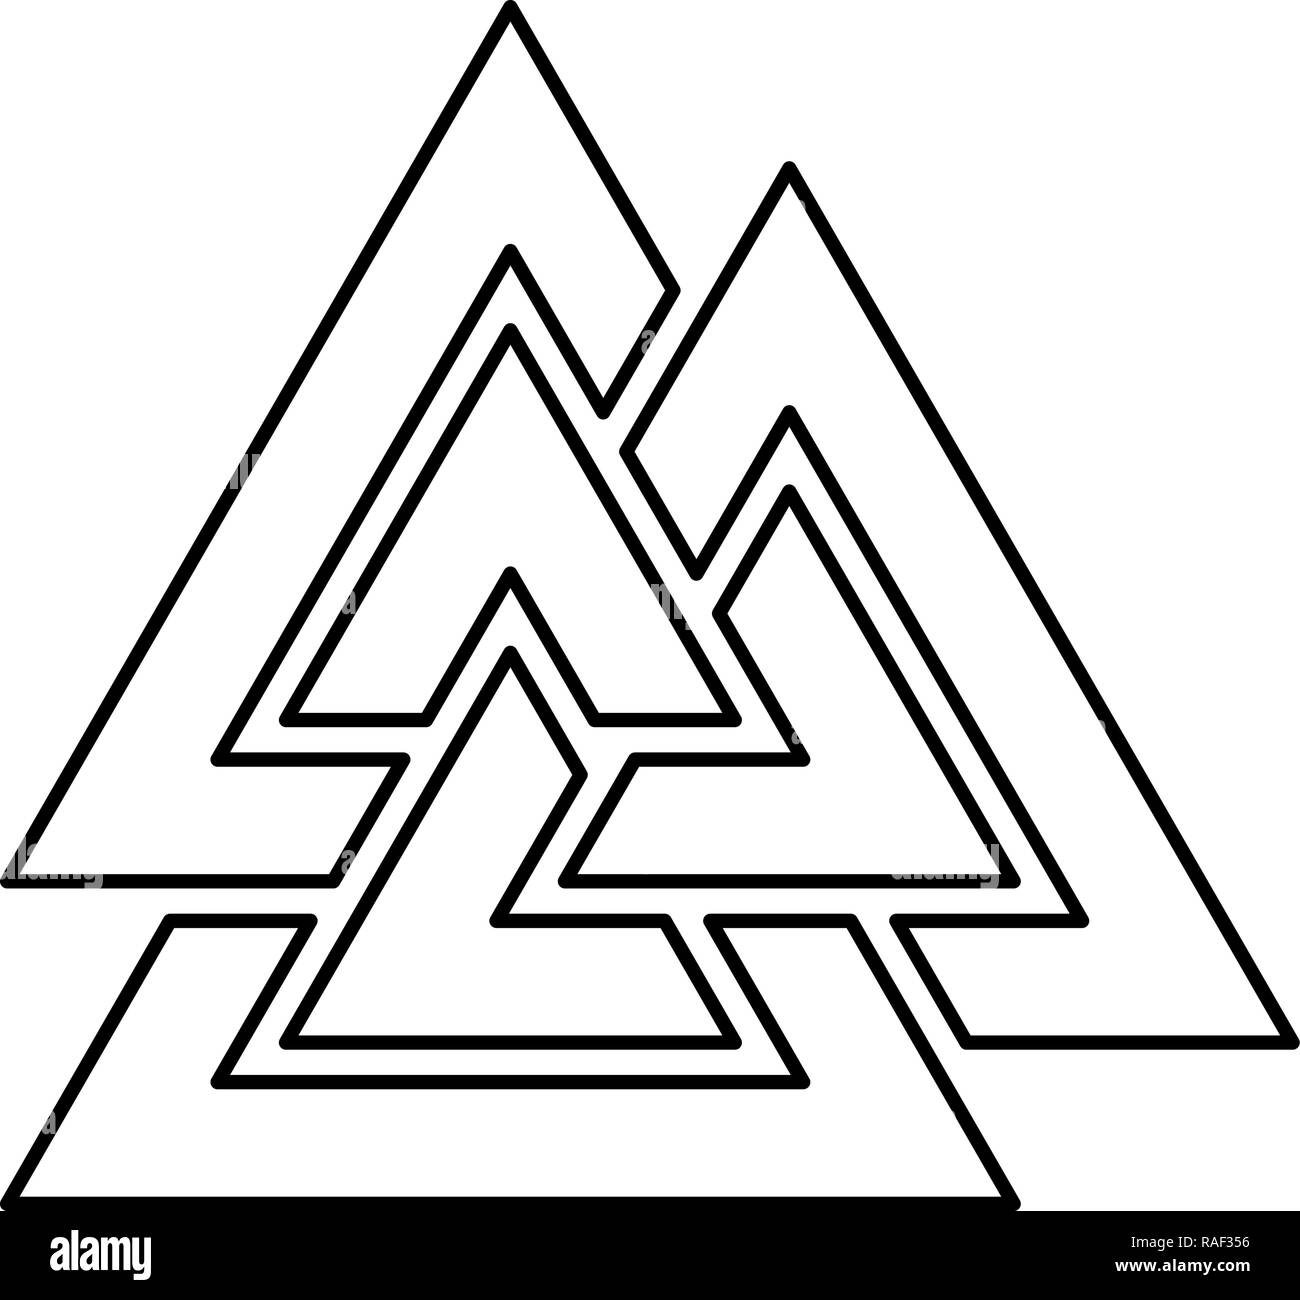 Valknut sign symblol icon black color vector I flat style simple image Stock Vector